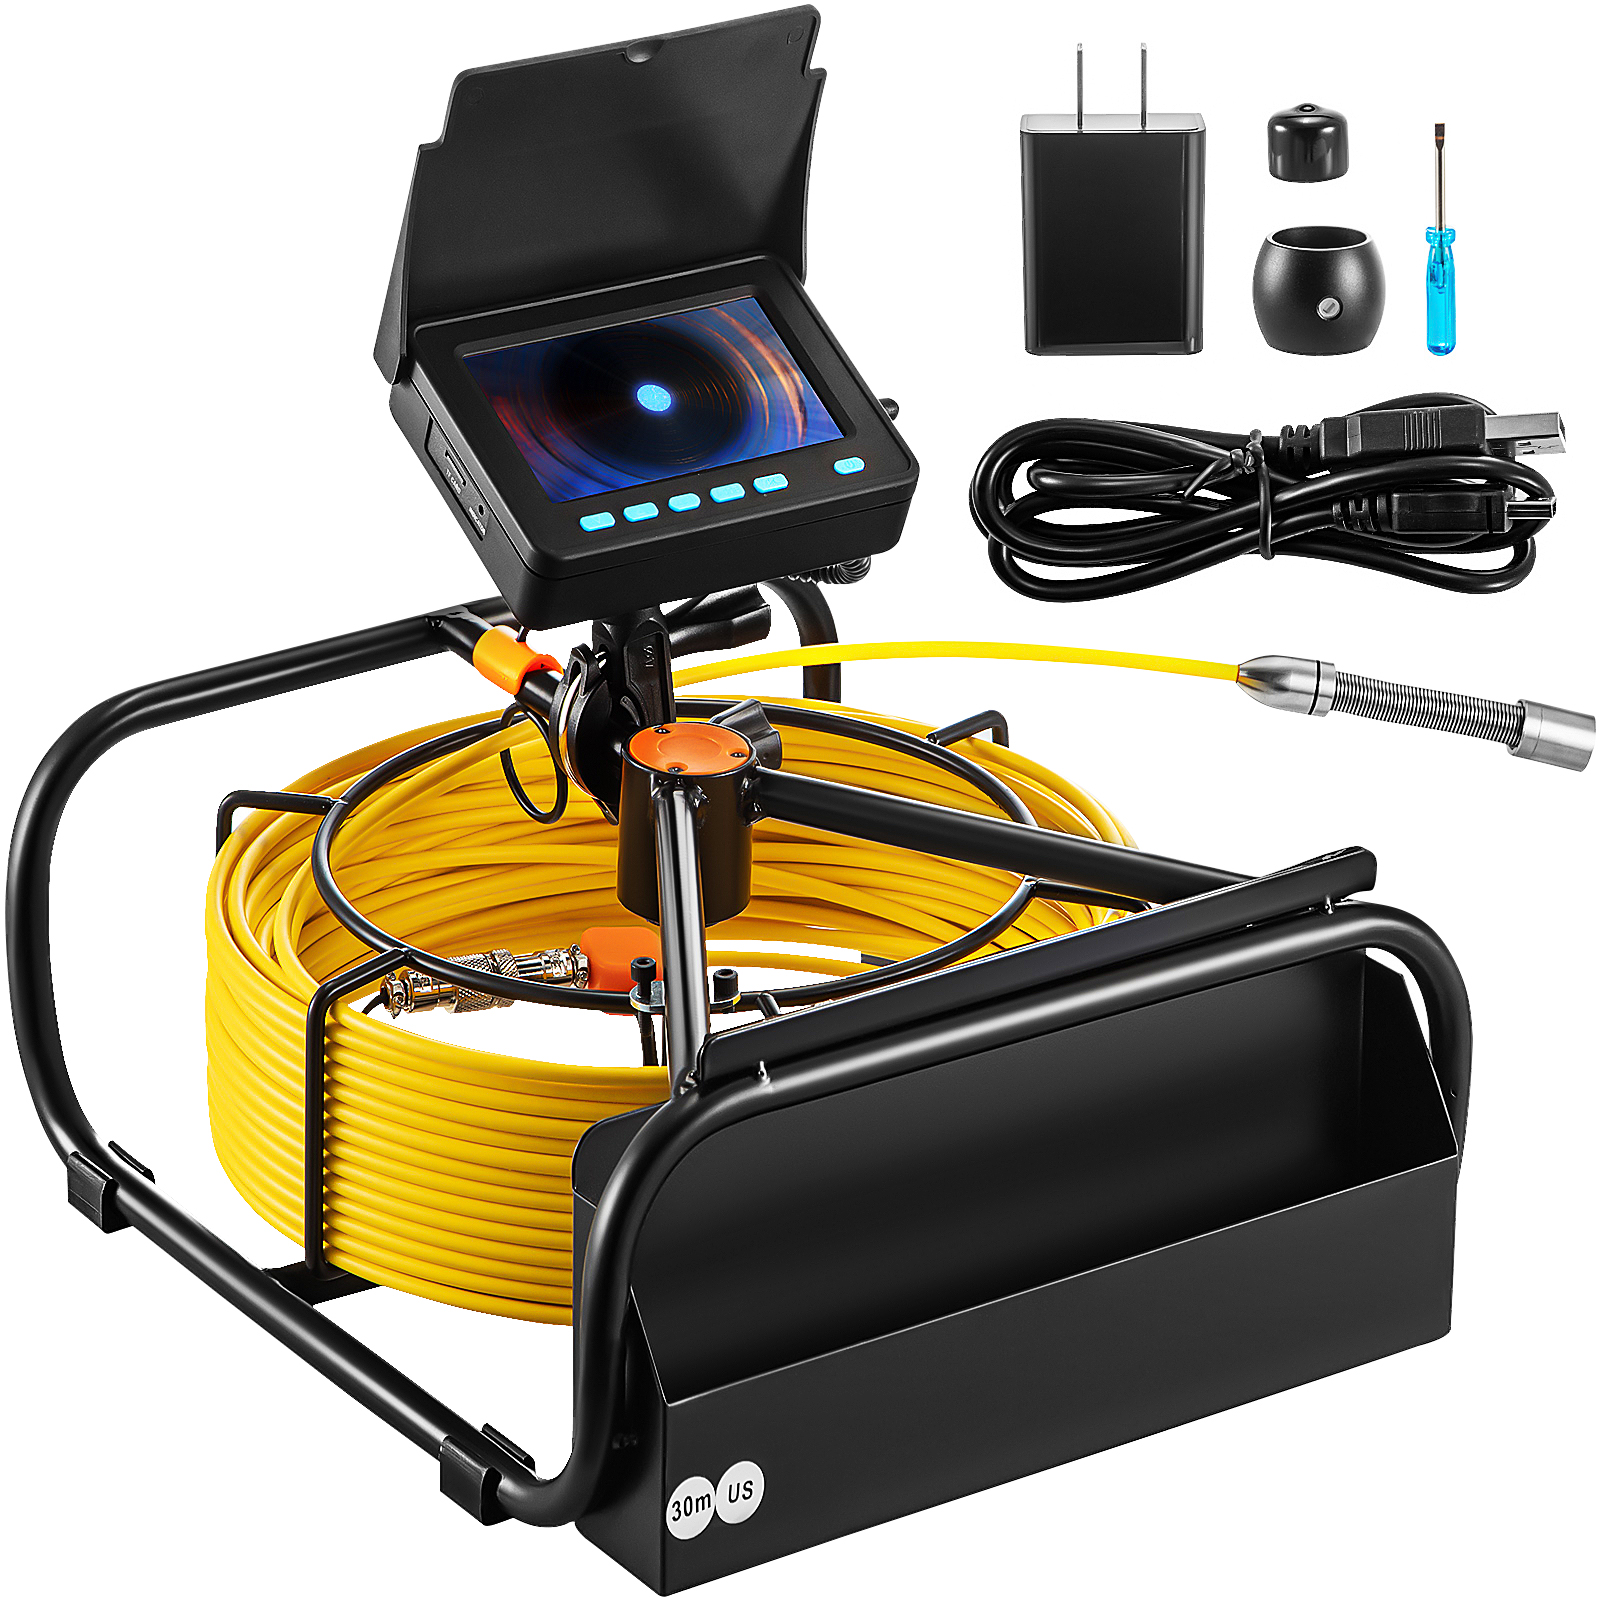 Pipe Inspection Camera, 50M / 164FT Cable, 4.3 In. Monitor